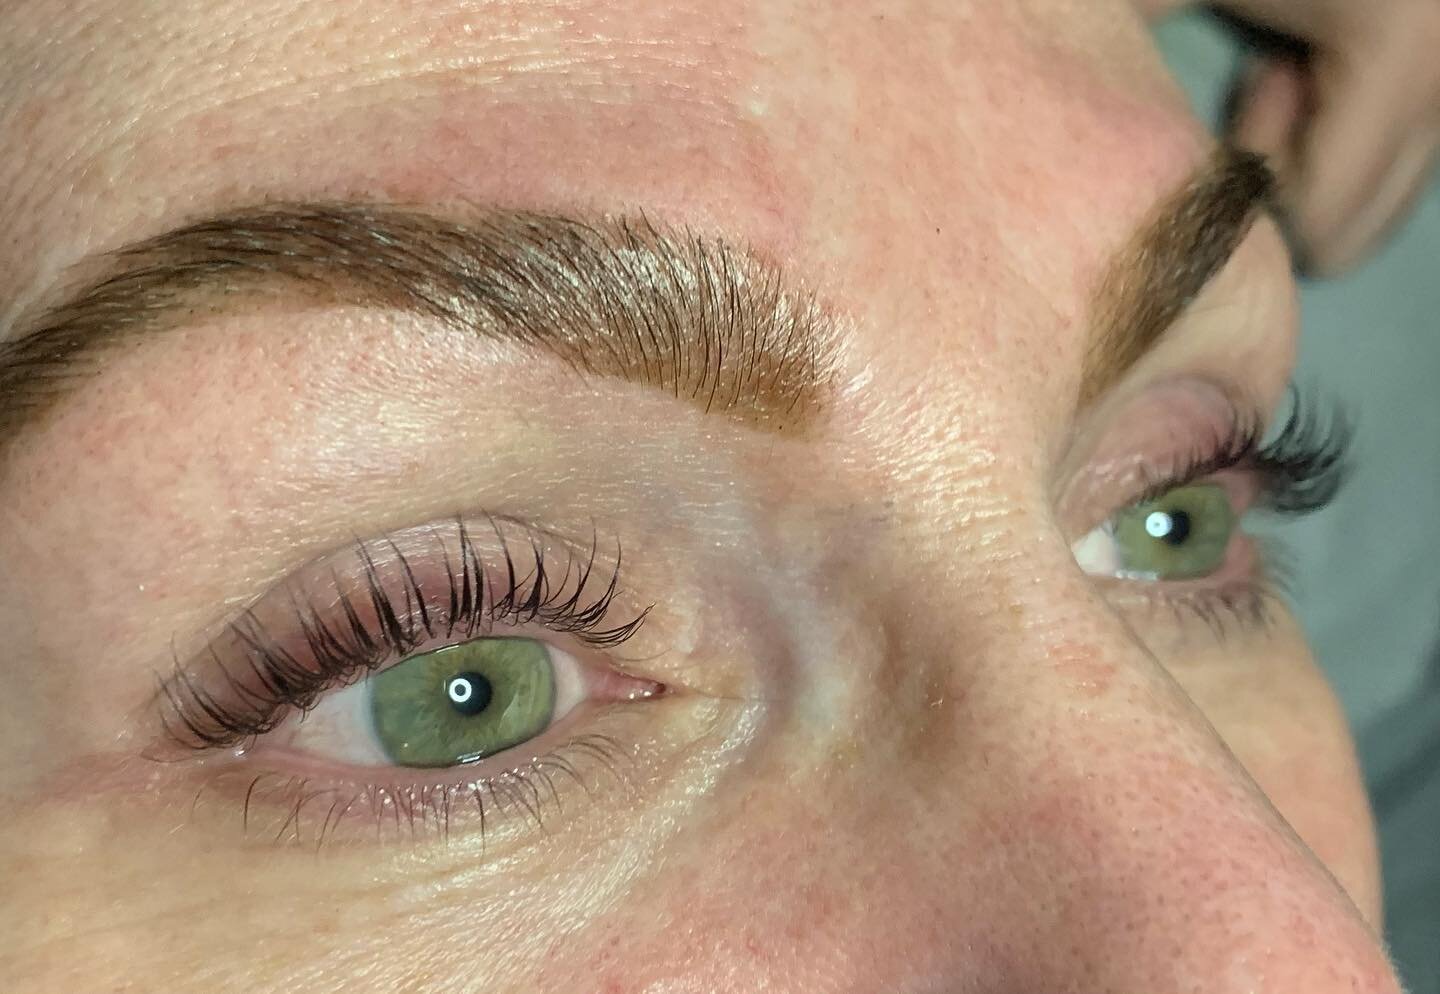 Lash game poppin&rsquo; 💁🏻&zwj;♀️ 

Lash lifts are a great alternative to extensions for those of you who are allergic to adhesive! Or even just prefer a more natural, low maintenance look. 

#lashlift #lashtint #lashgoals #browgoals #pittsburgh #p